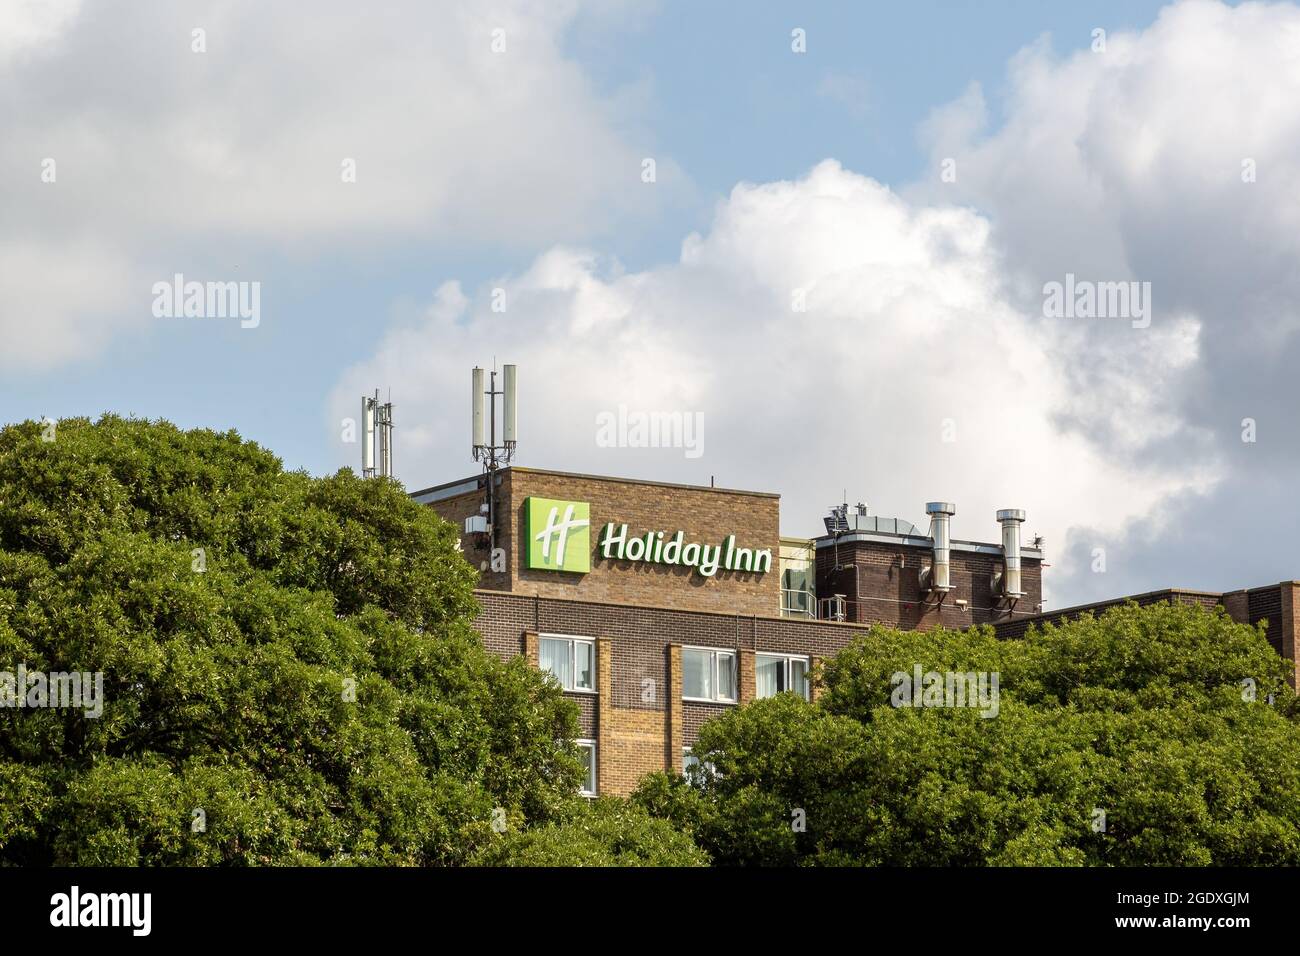 08-12-2021 Portsmouth, Hampshire, UK The Sign of Holiday Inn hotel through trees Stock Photo